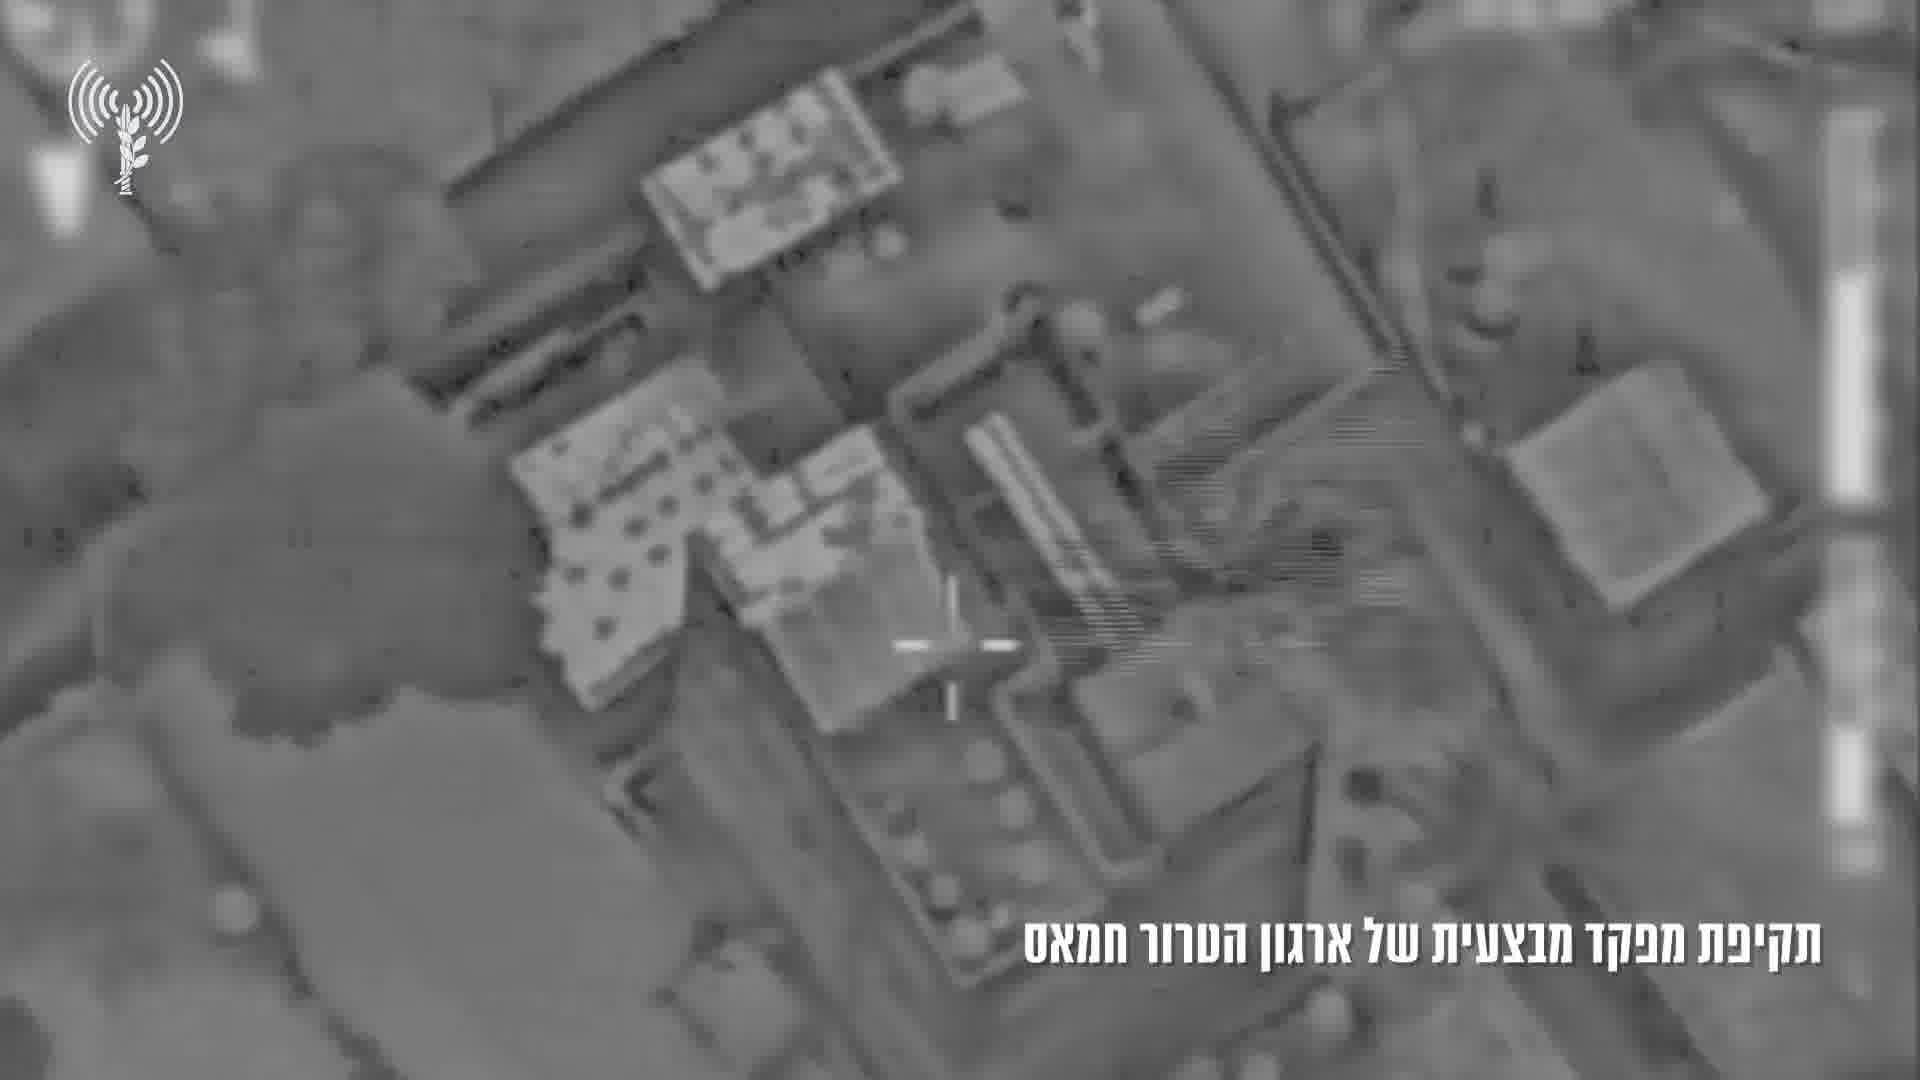 The IDF says that over the past day it carried out strikes against dozens of targets and Hamas operatives in the Gaza Strip. The sites included command rooms, rocket launch sites, and weapons production labs, it says.